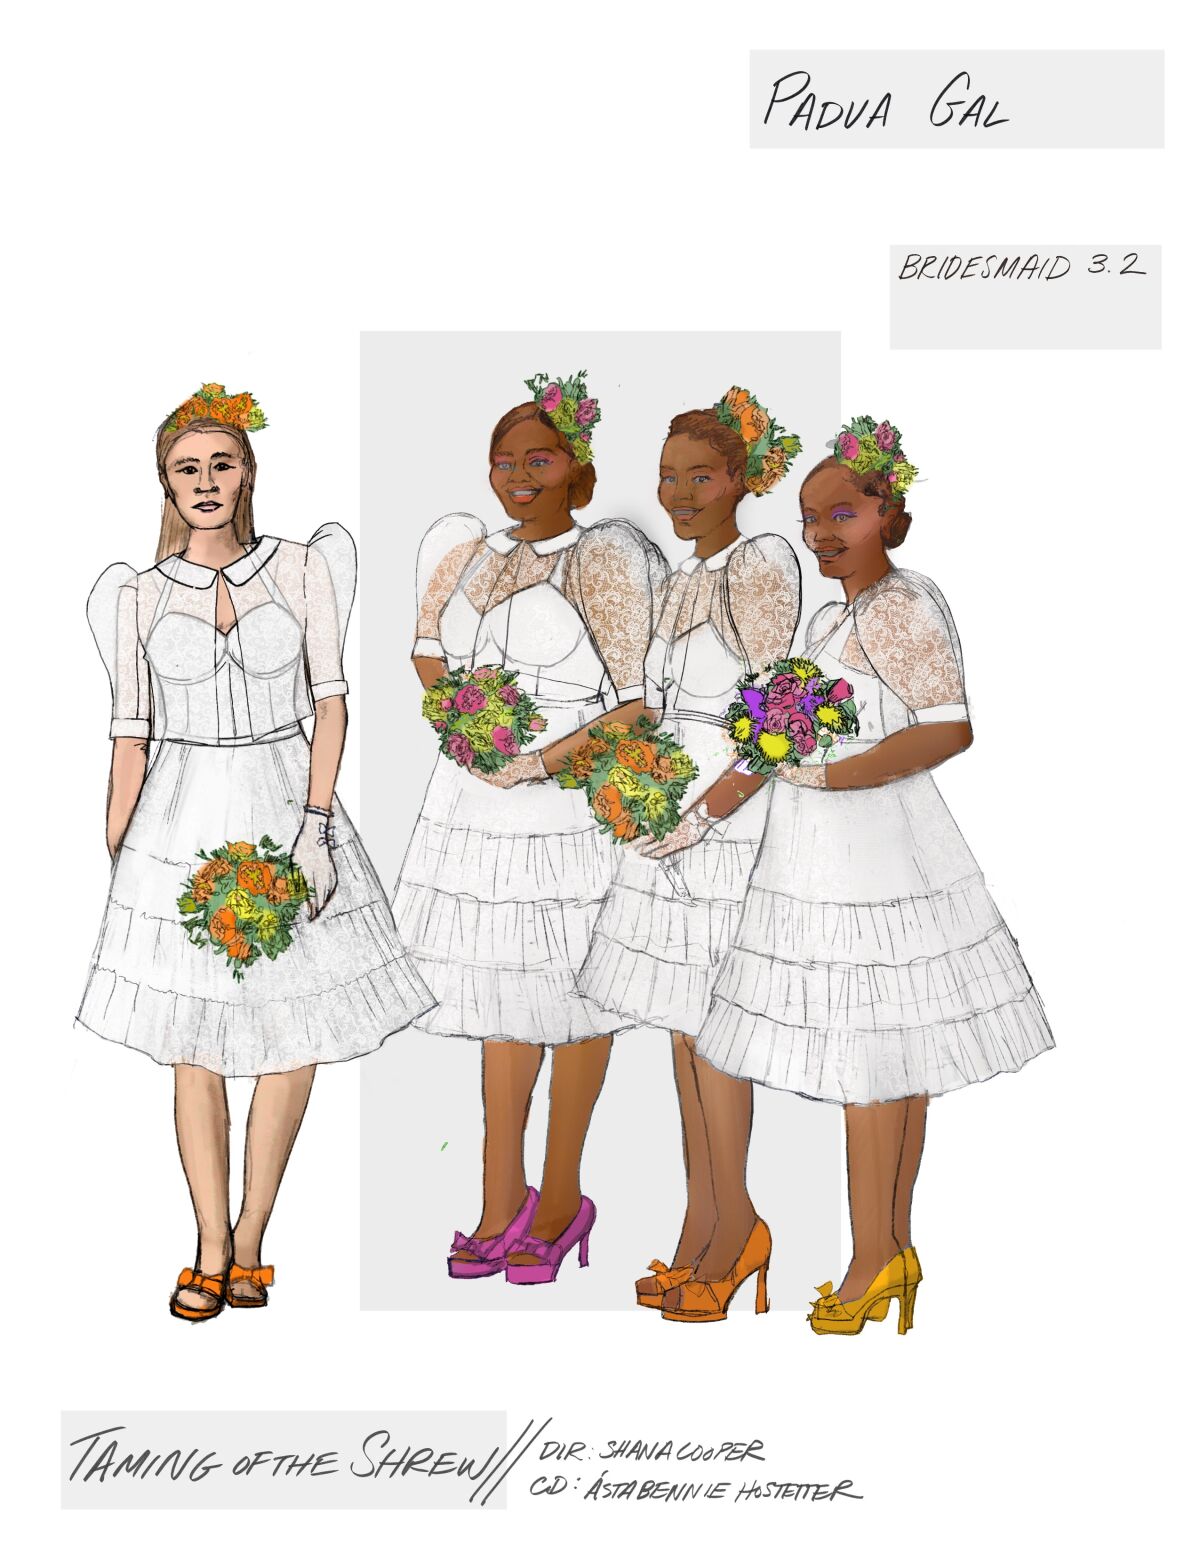 A sketch of bridesmaid dress by costume designer Asta Hostetter for "The Taming of the Shrew."